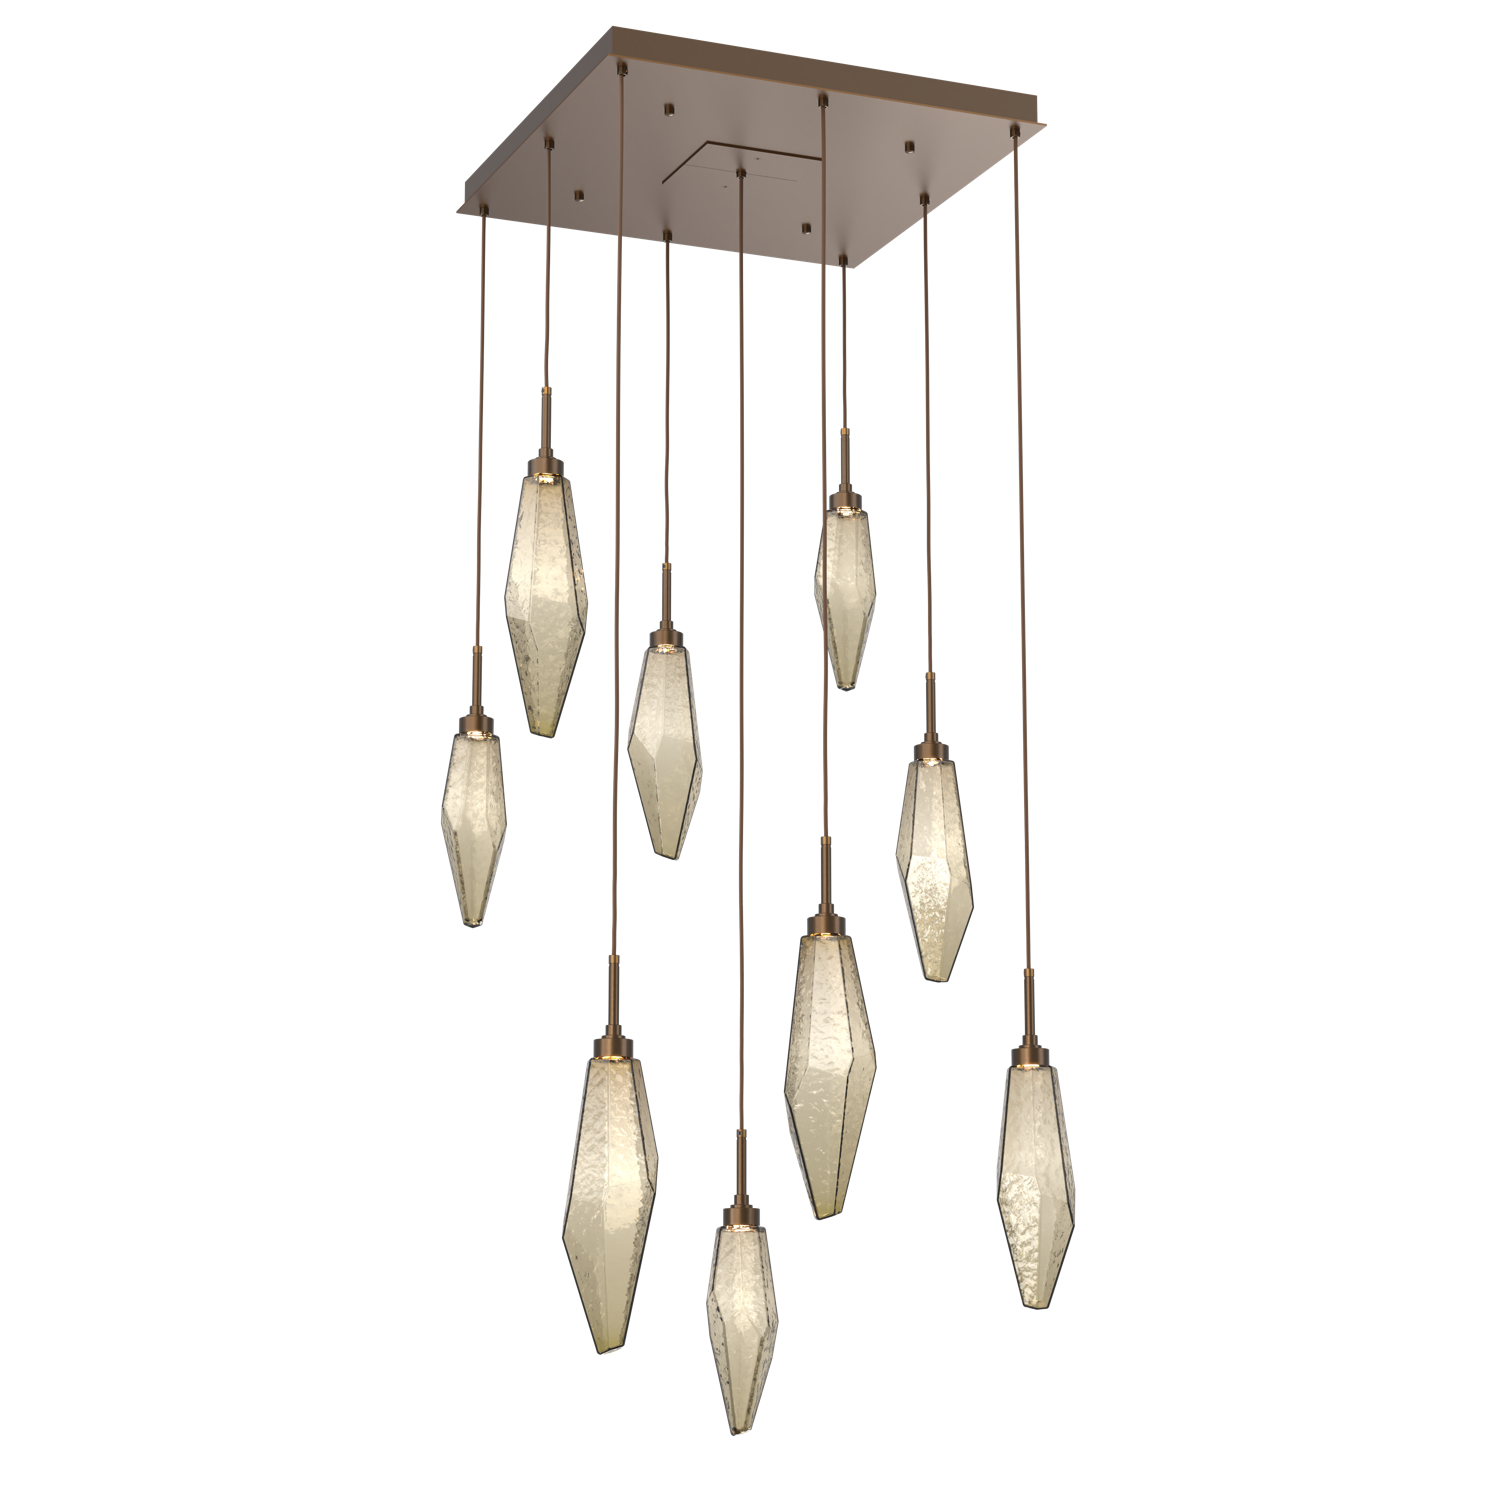 CHB0050-09-FB-CB-Hammerton-Studio-Rock-Crystal-9-light-square-pendant-chandelier-with-flat-bronze-finish-and-chilled-bronze-blown-glass-shades-and-LED-lamping